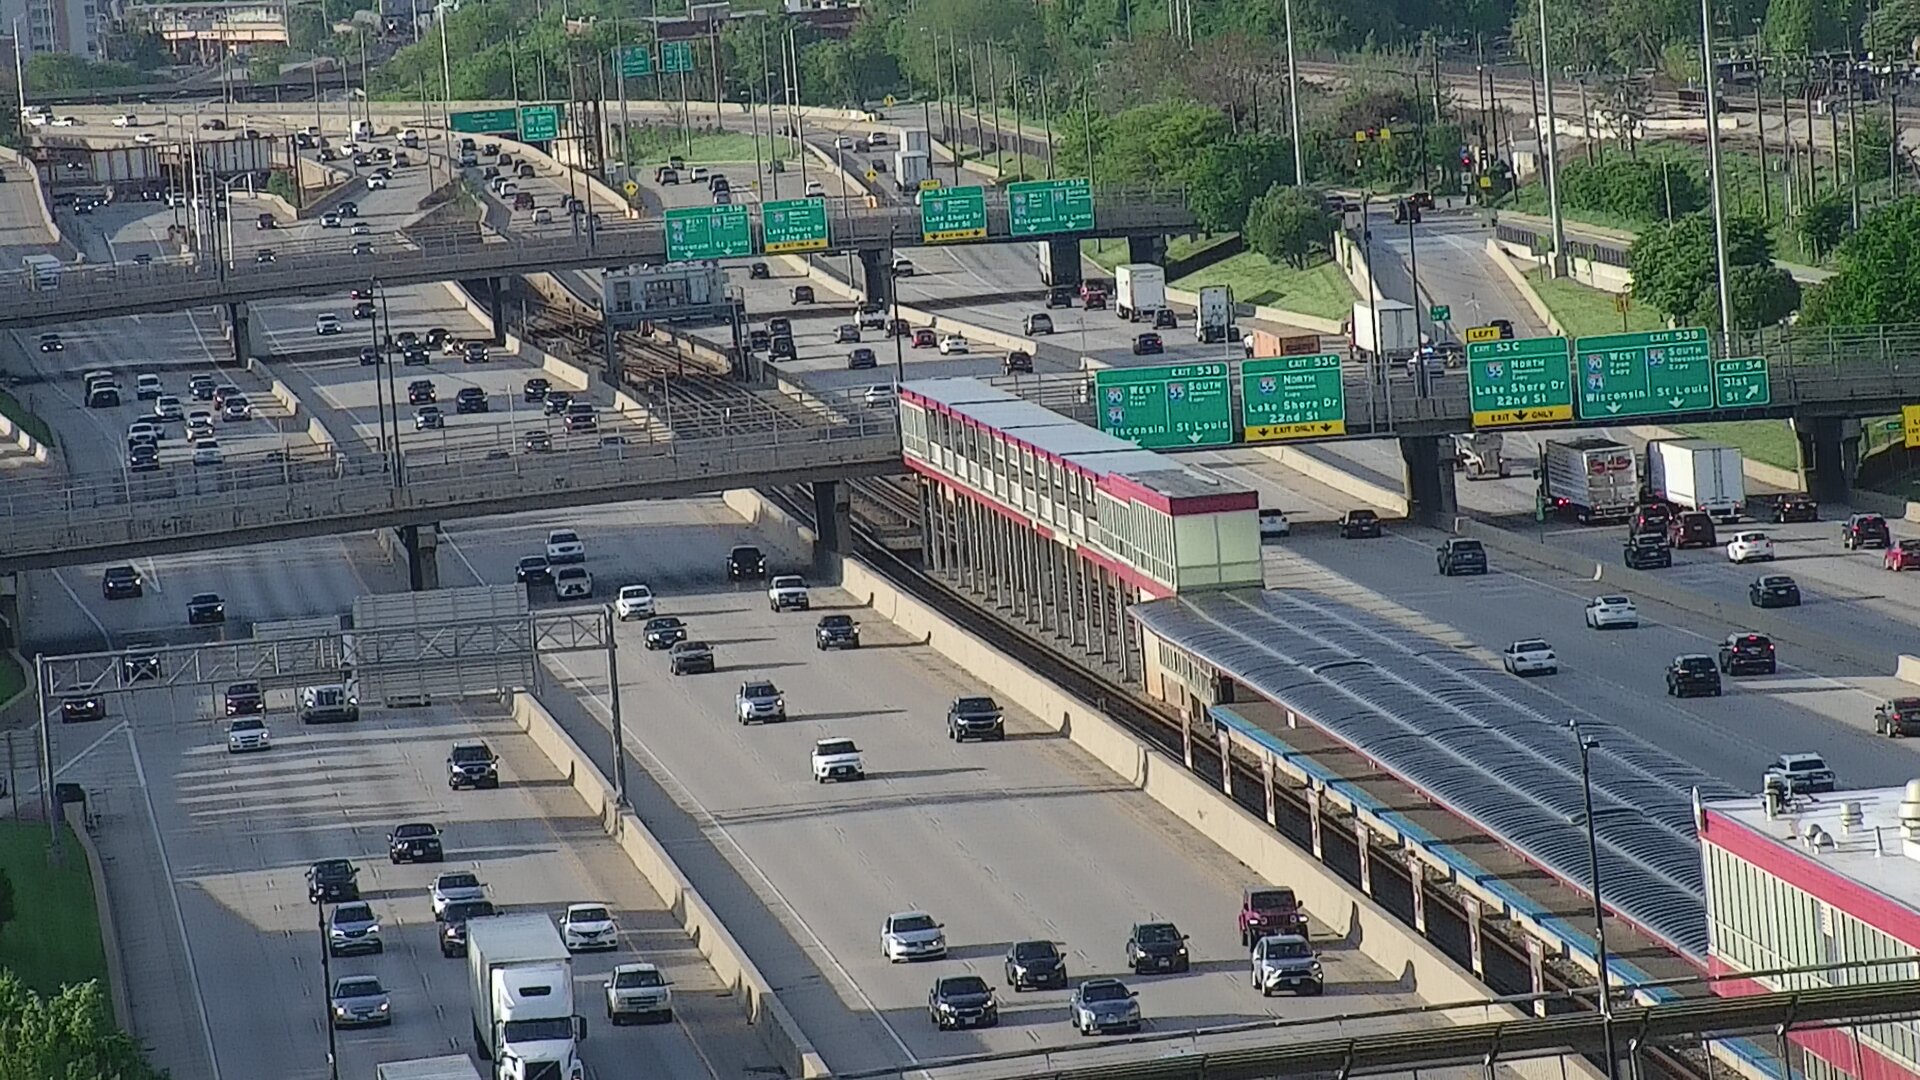 Dan Ryan at 35th St. 1 - Chicago and Illinois